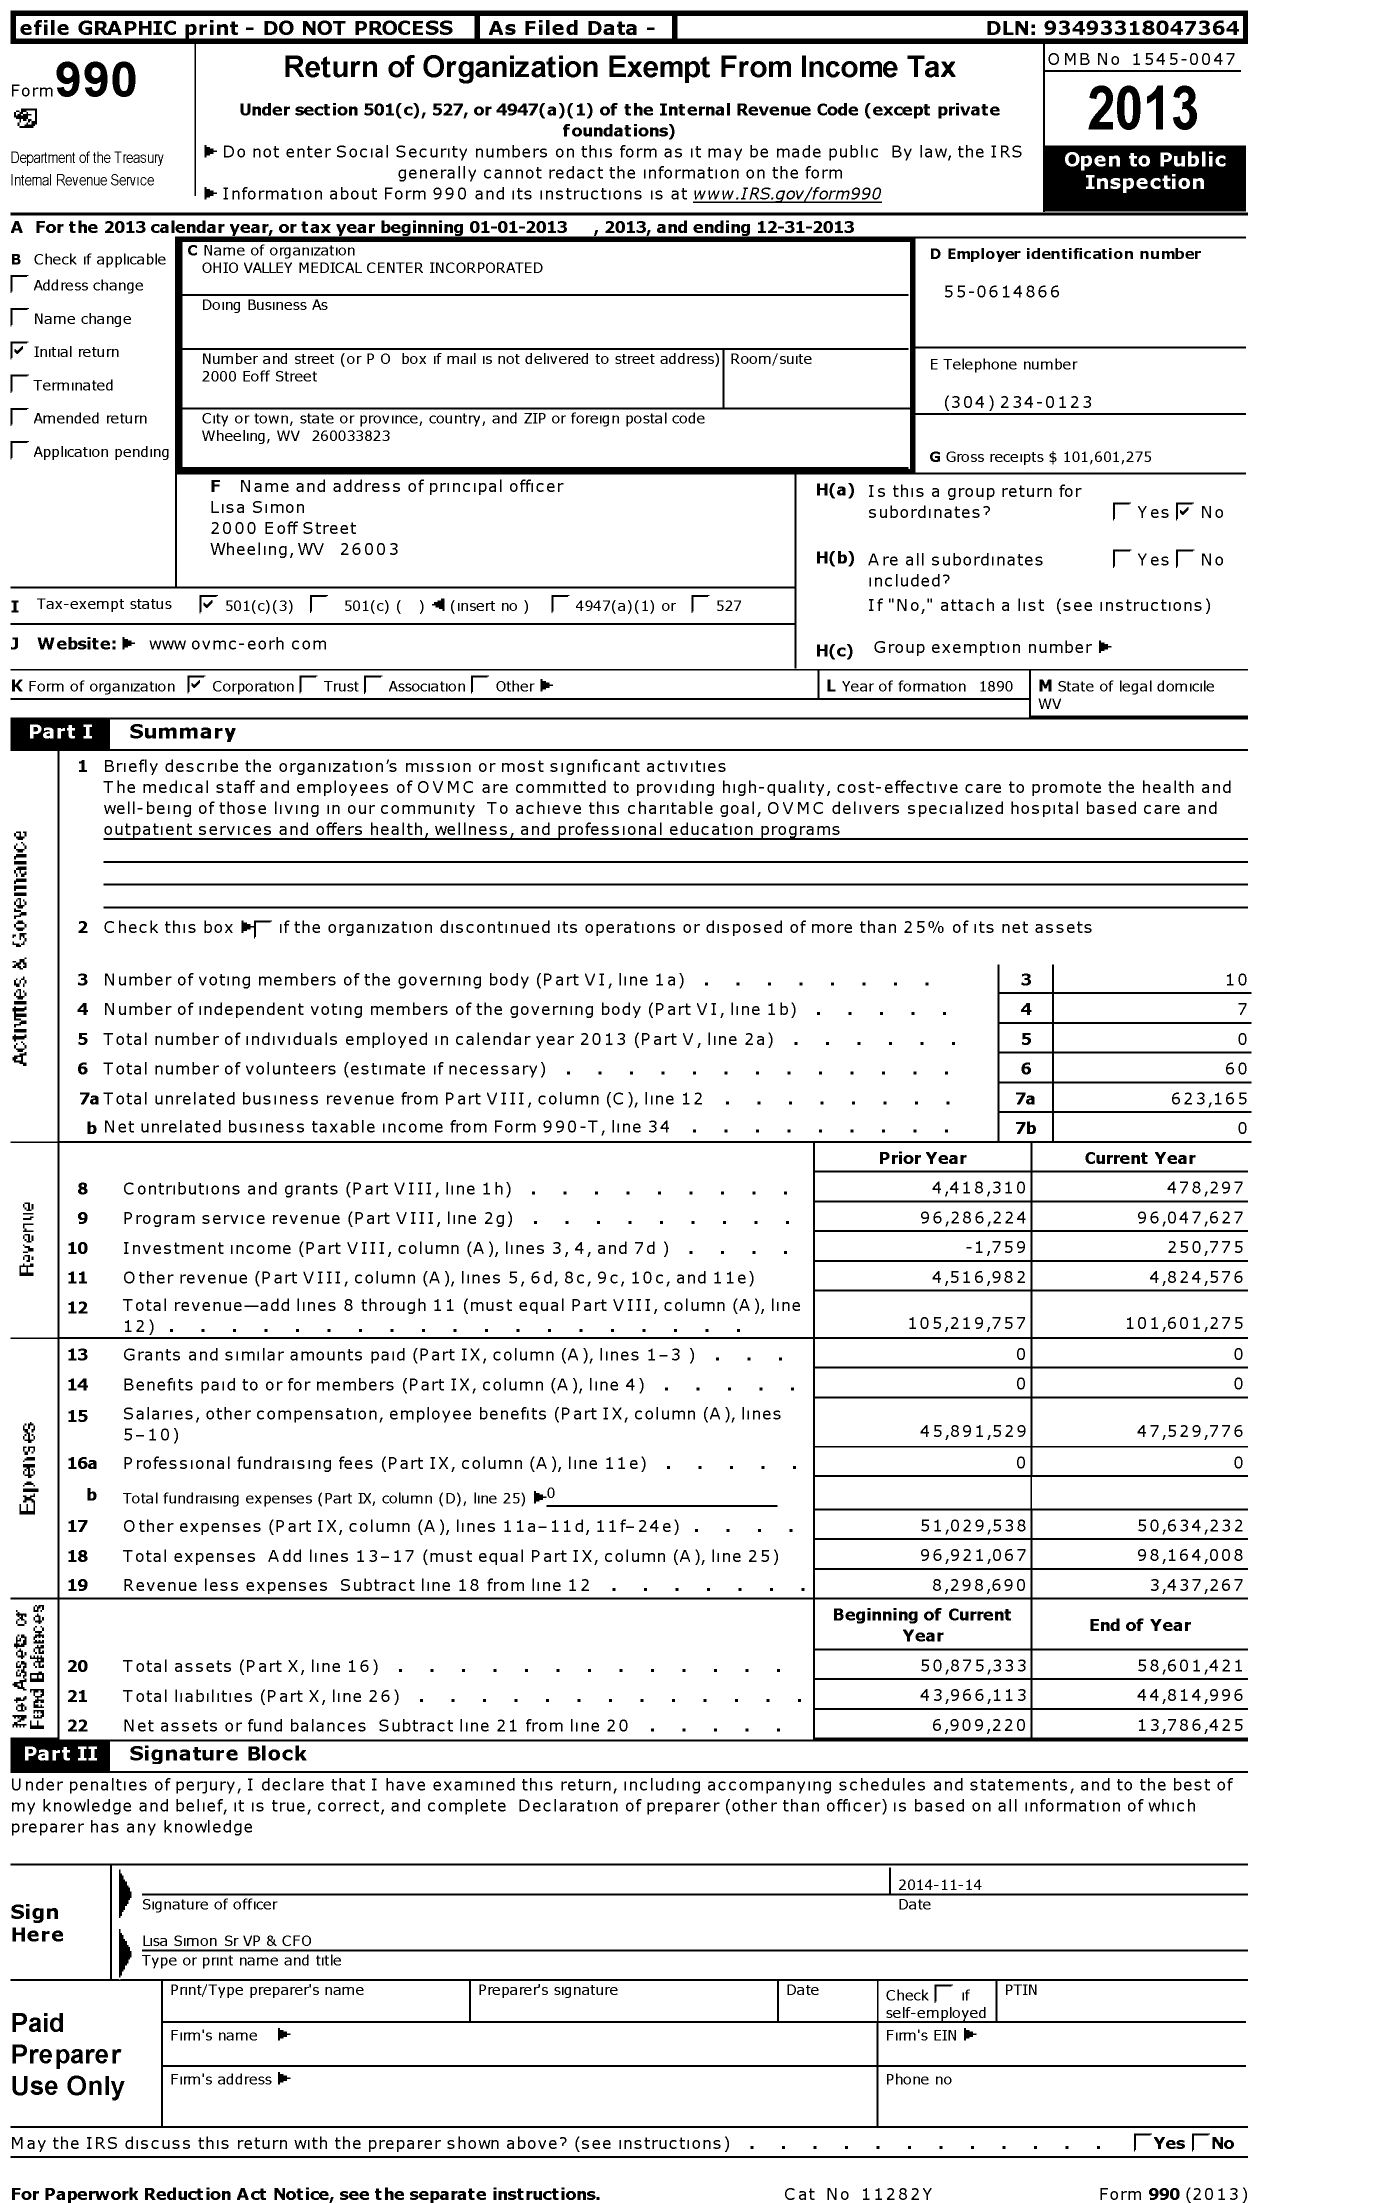 Image of first page of 2013 Form 990 for Ohio Valley Medical Center (OVMC)